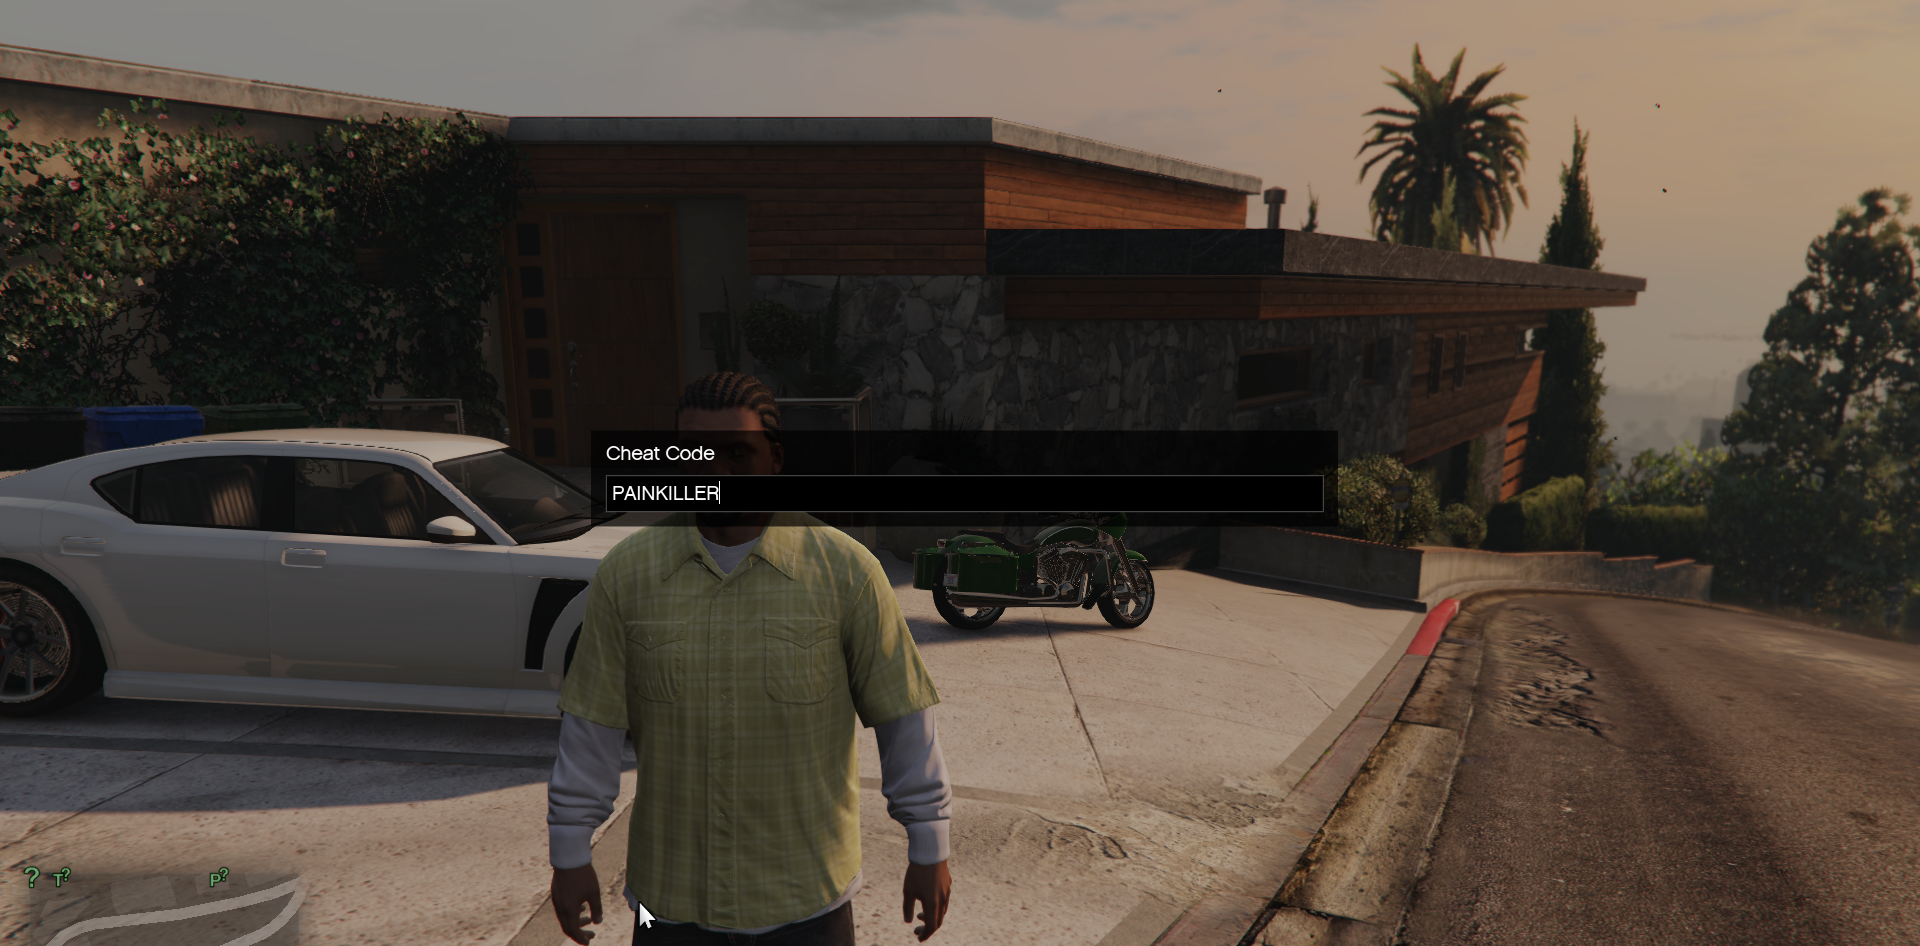 Bring up the console to use the Invincibility Cheat in GTA V. 